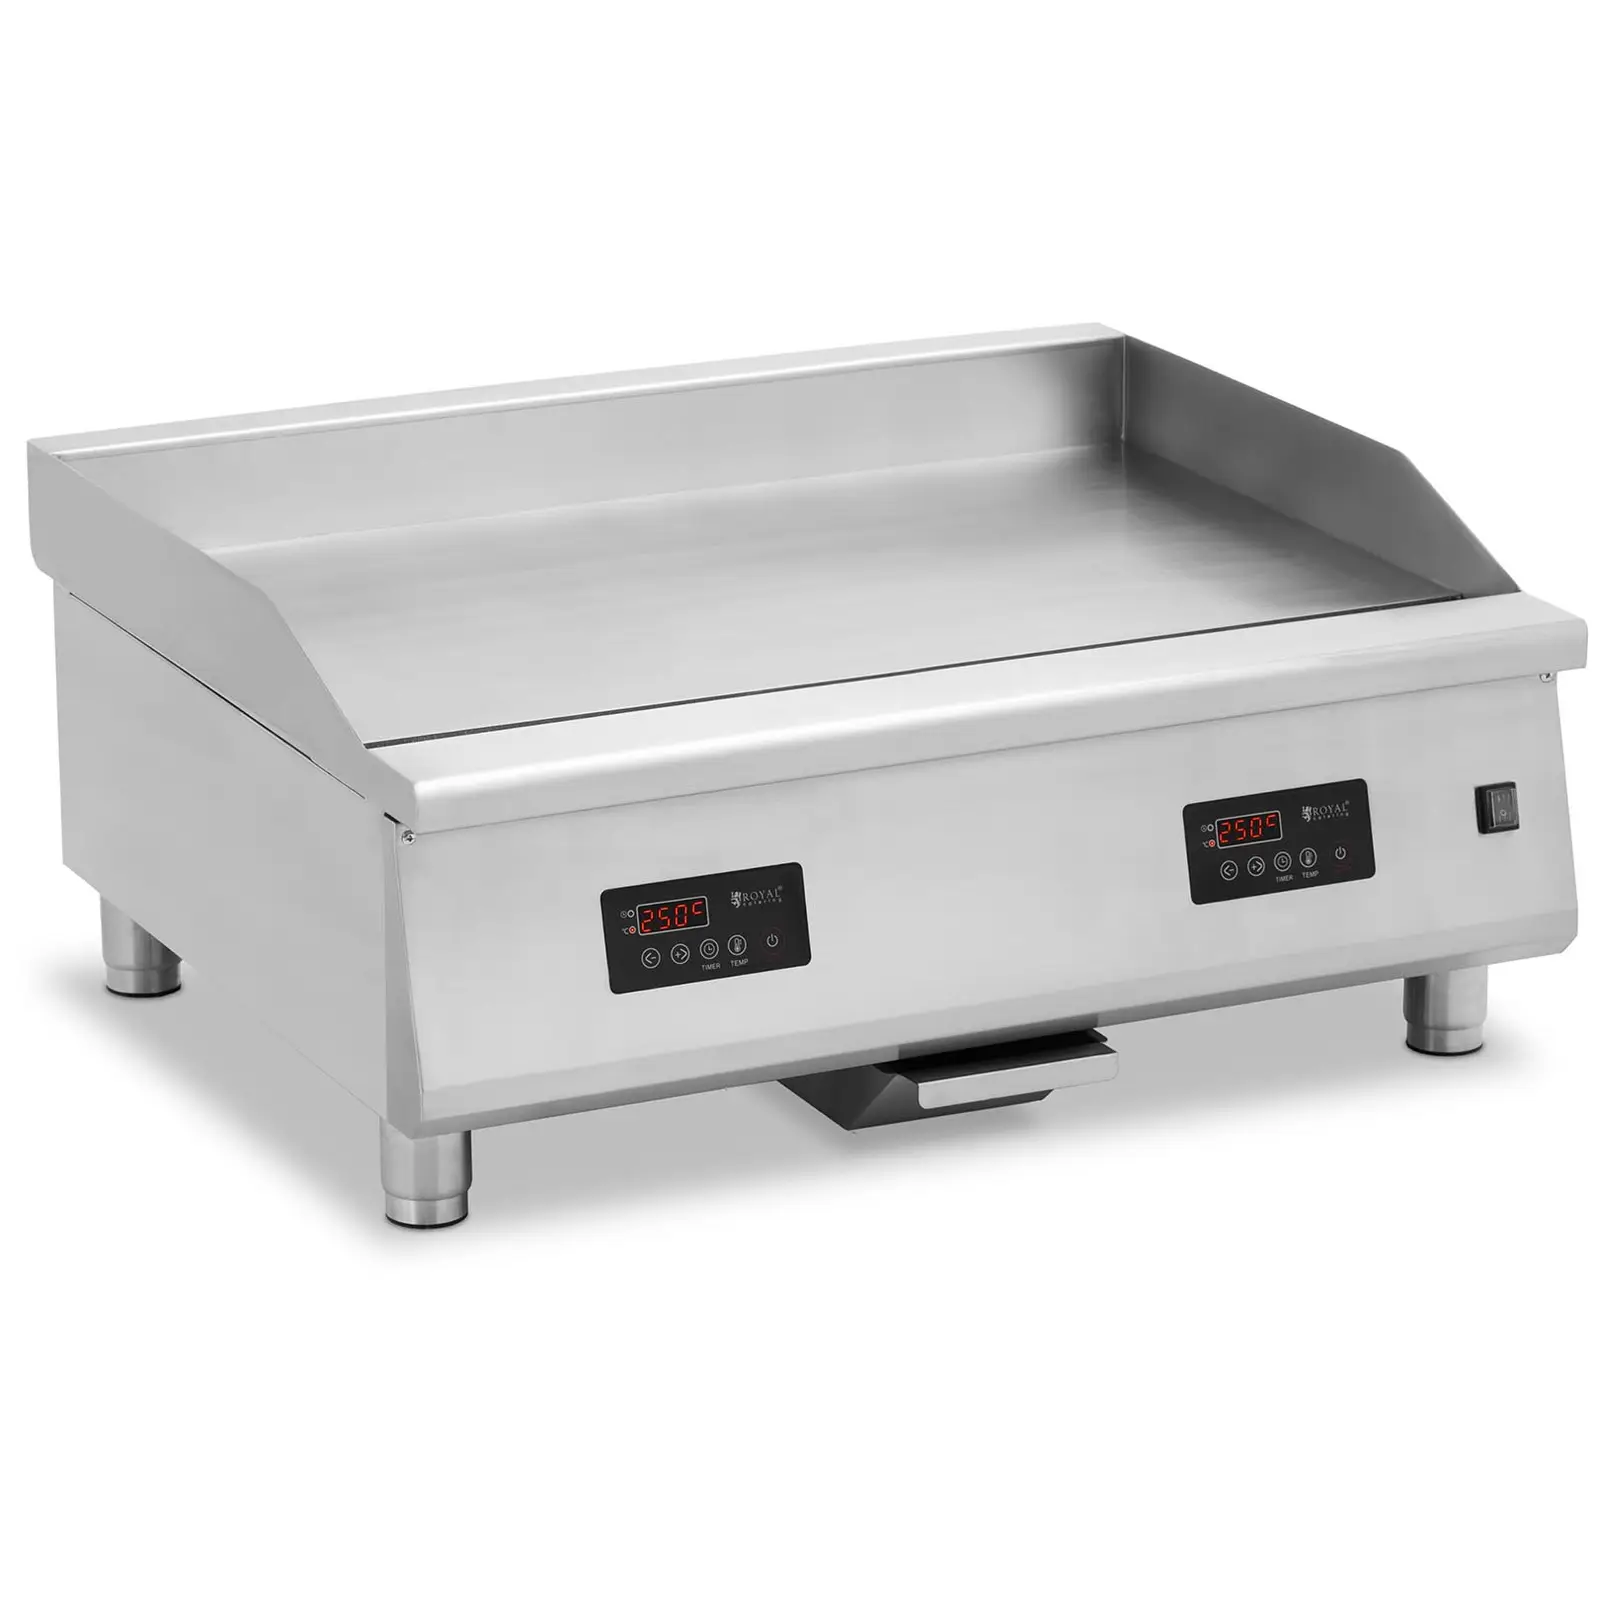 Grill de contact - 910 x 520 mm - lisse - 2 x 6000 W - Royal Catering